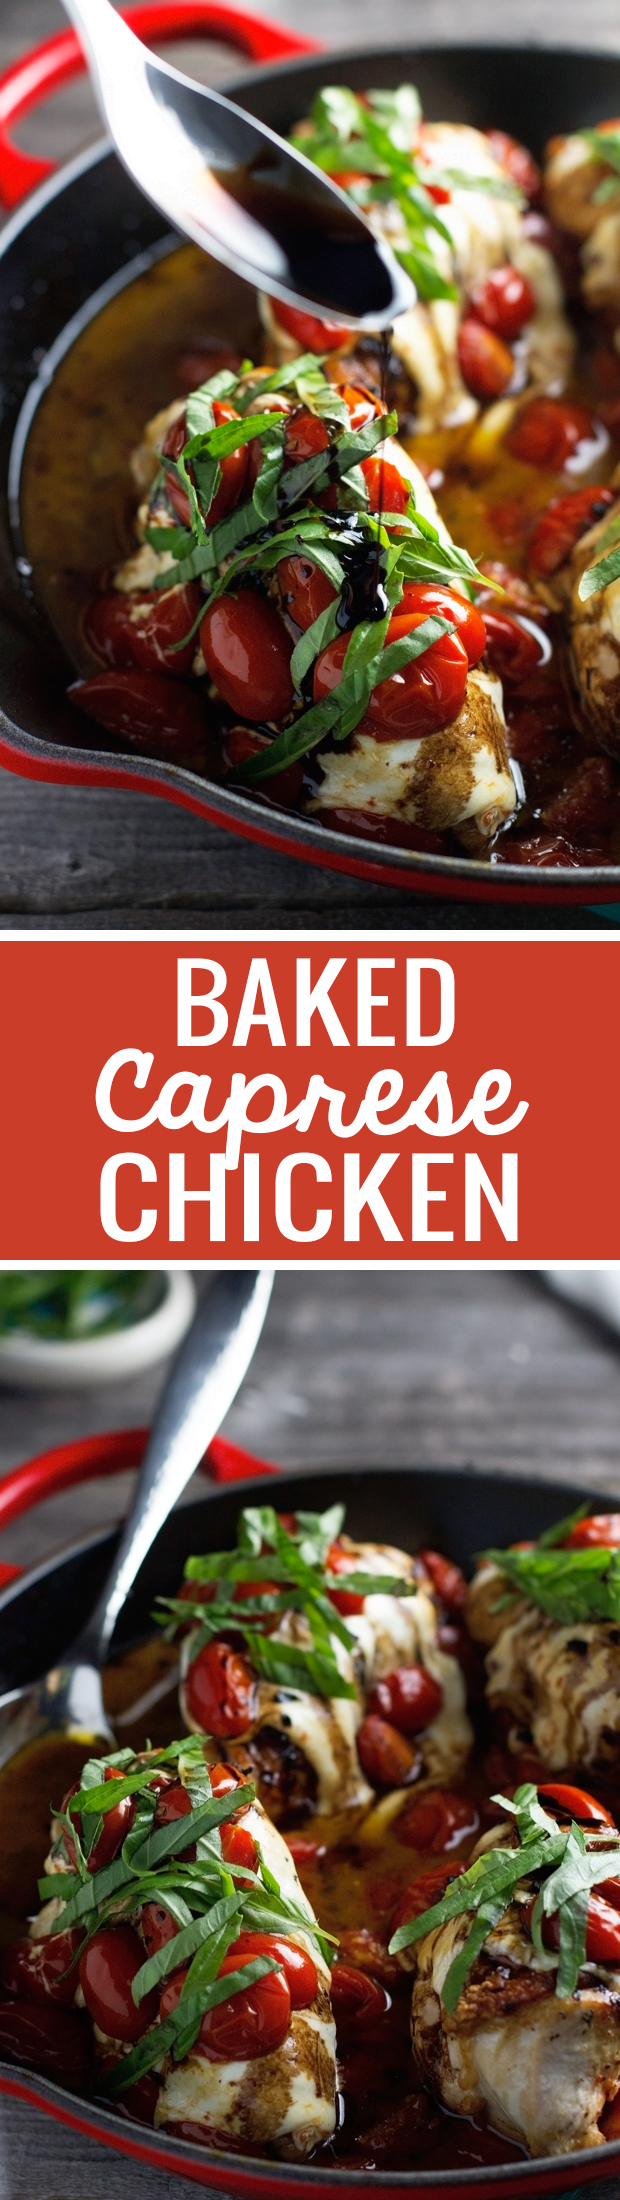 Baked Caprese Chicken - with the most delicious balsamic reduction of your LIFE. Ready in under an hour and perfect and so DELICIOUS! #caprese #bakedcapresechicken #chickendinner #capresechicken | Littlespicejar.com